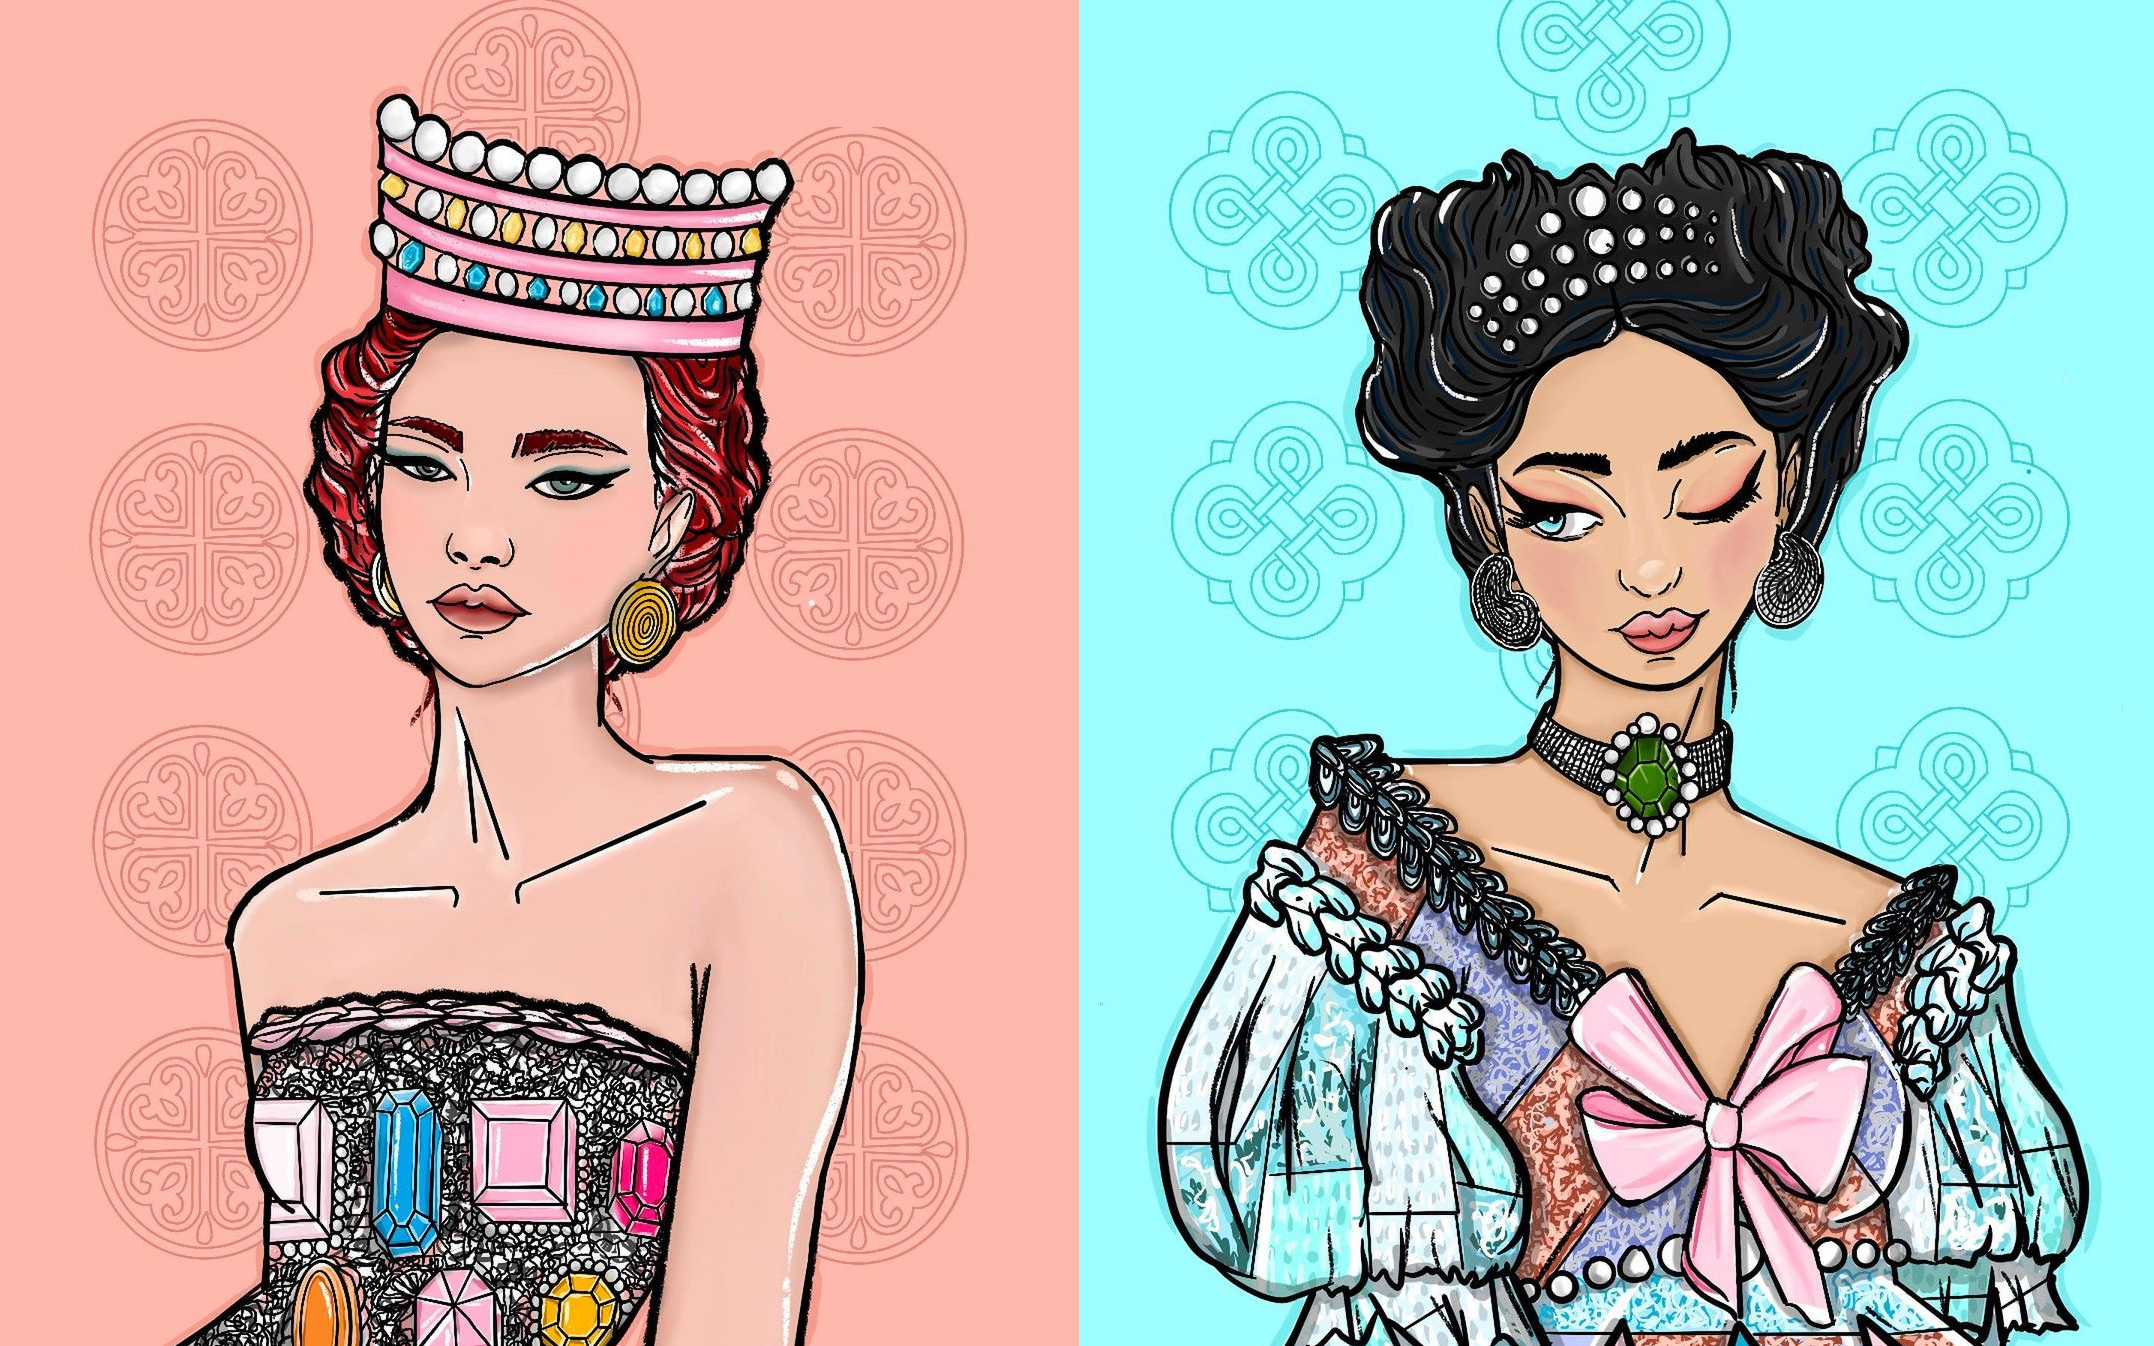  Artist Moon Malek is inspired by pop culture and pretty desserts